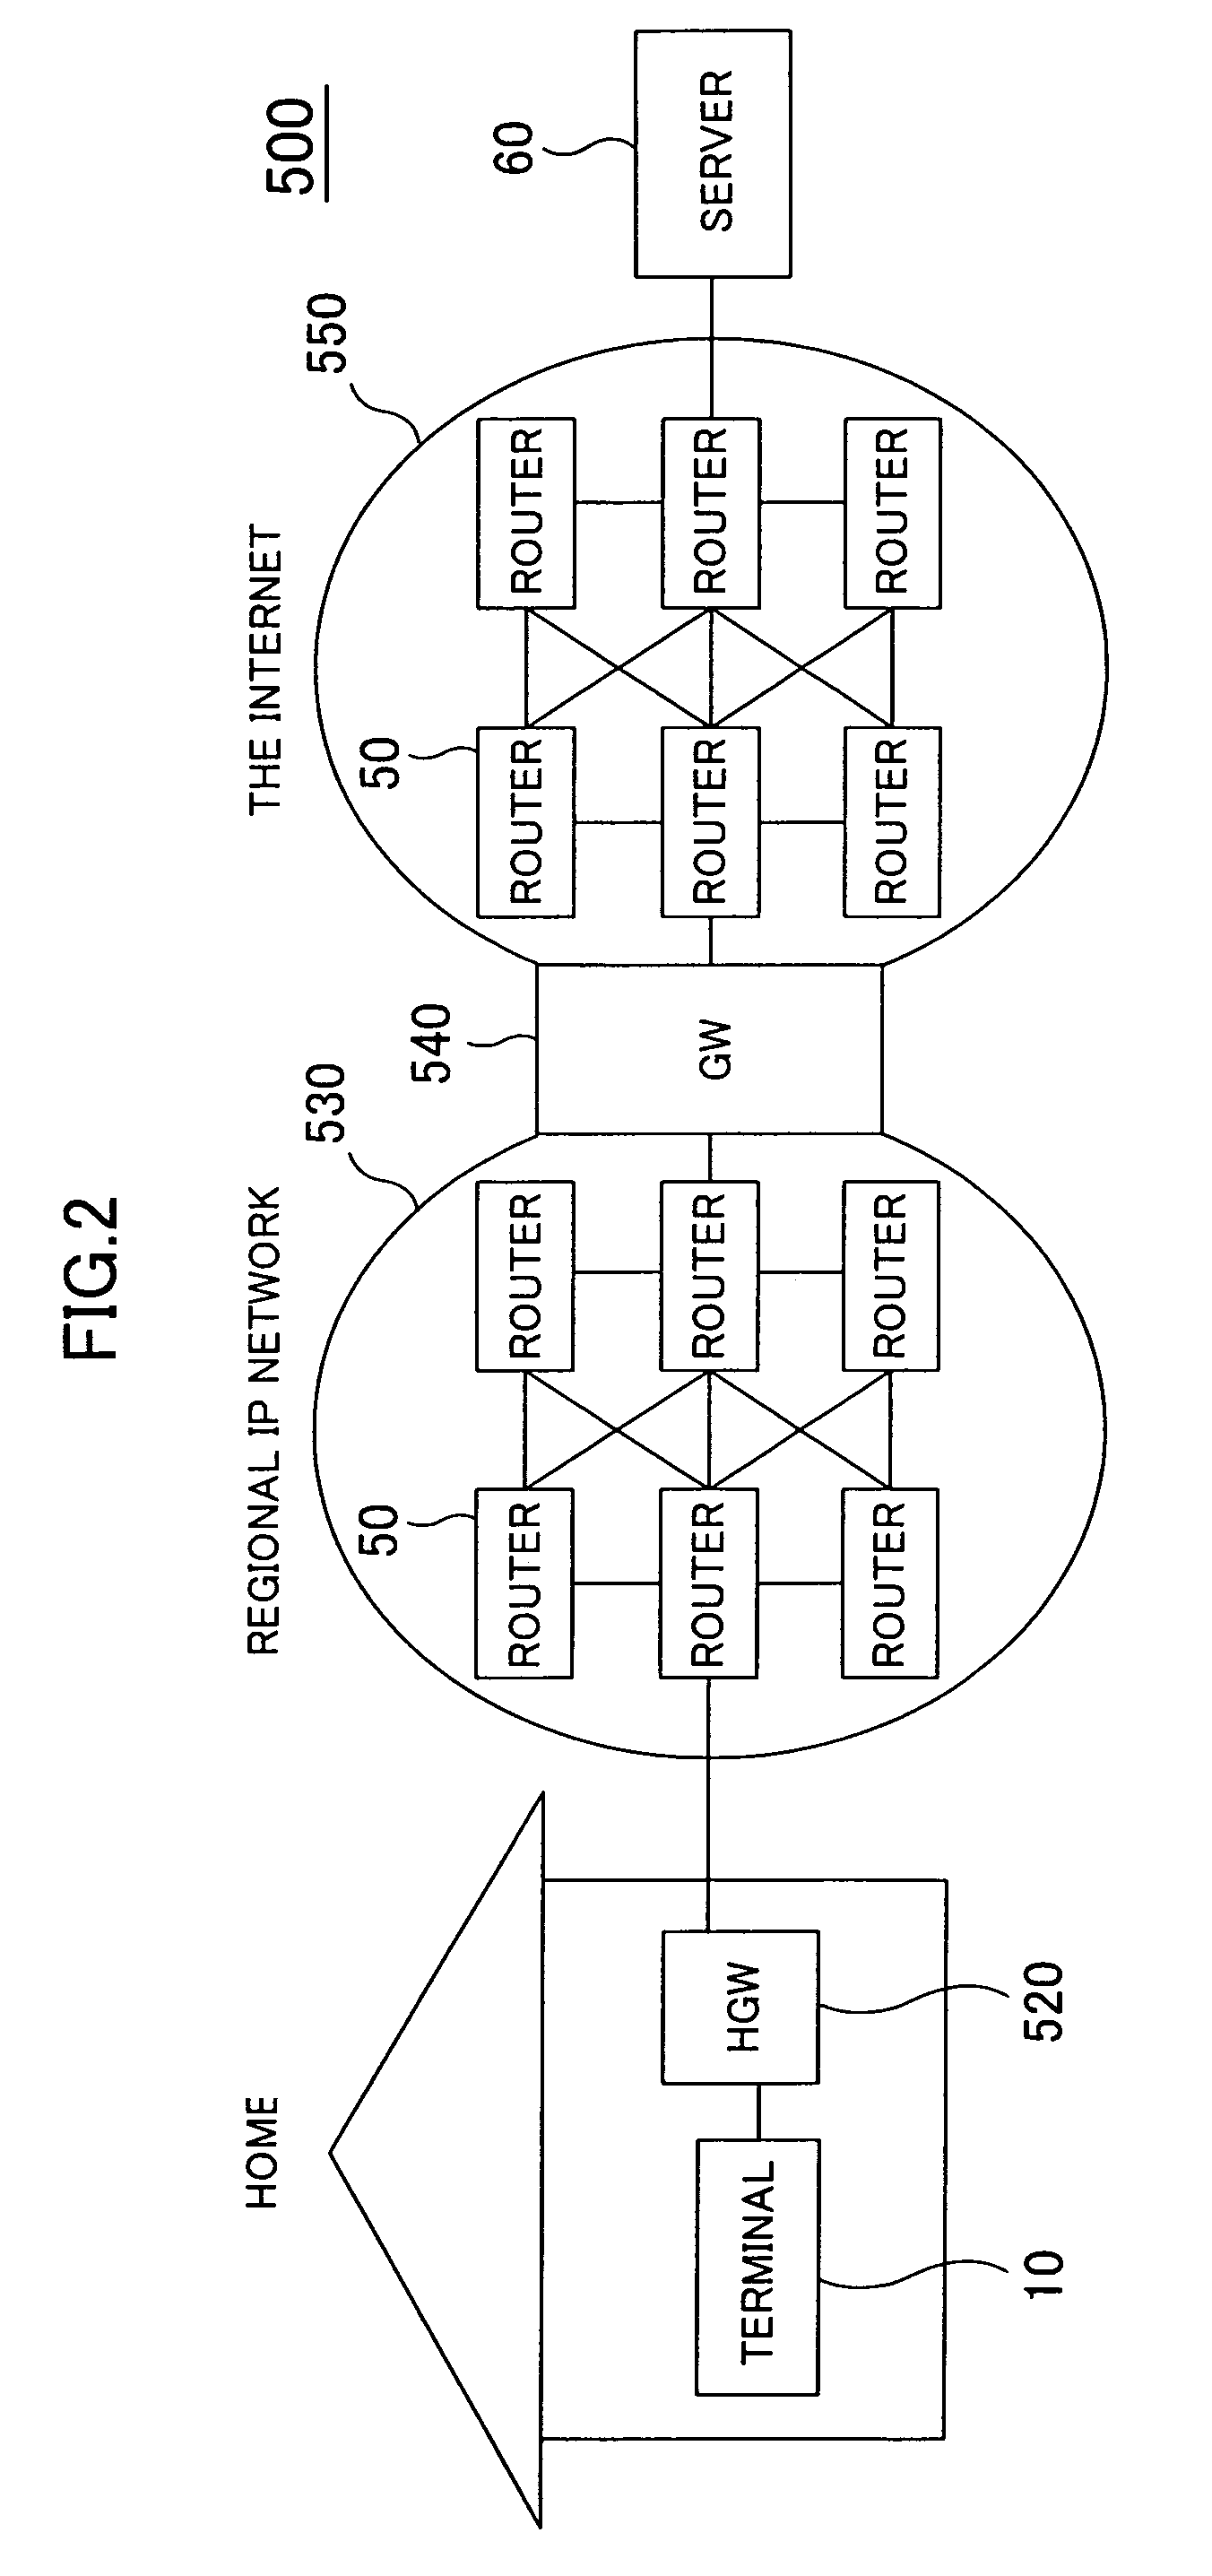 Network relay apparatus and packet distribution method